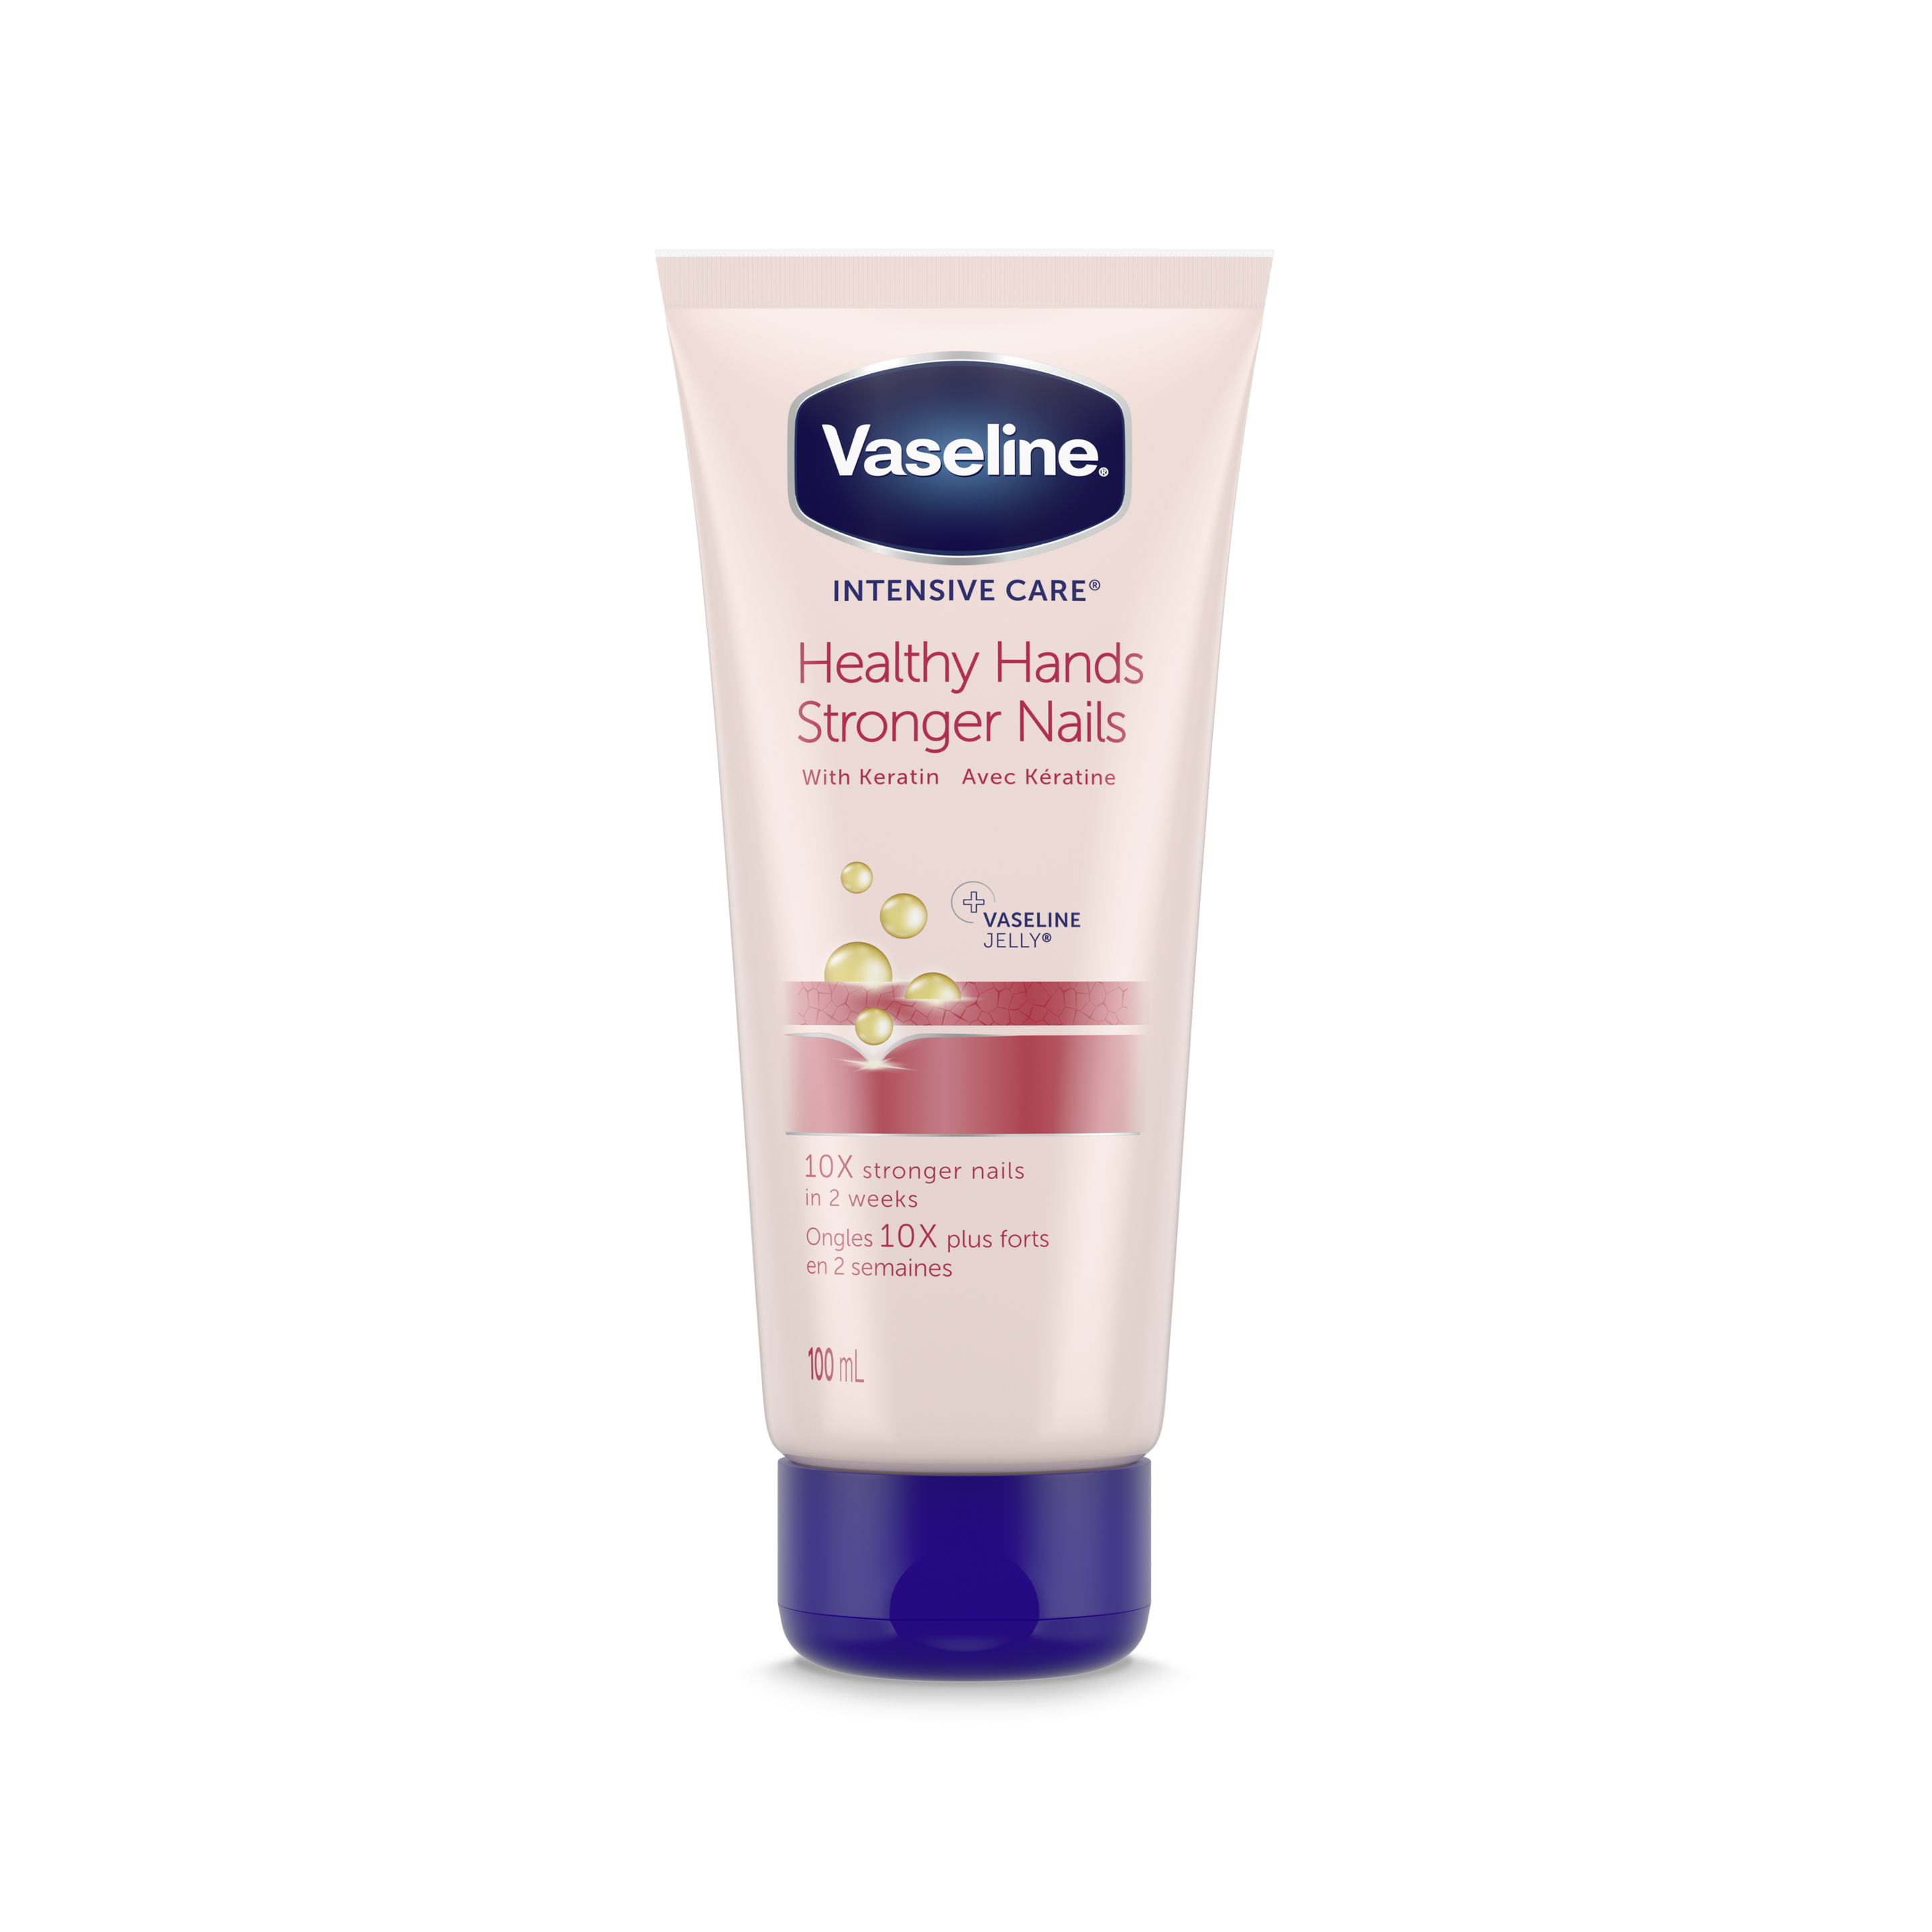 Vaseline Intensive Care Healthy Hands Stronger Nails with keratin - INCI  Beauty